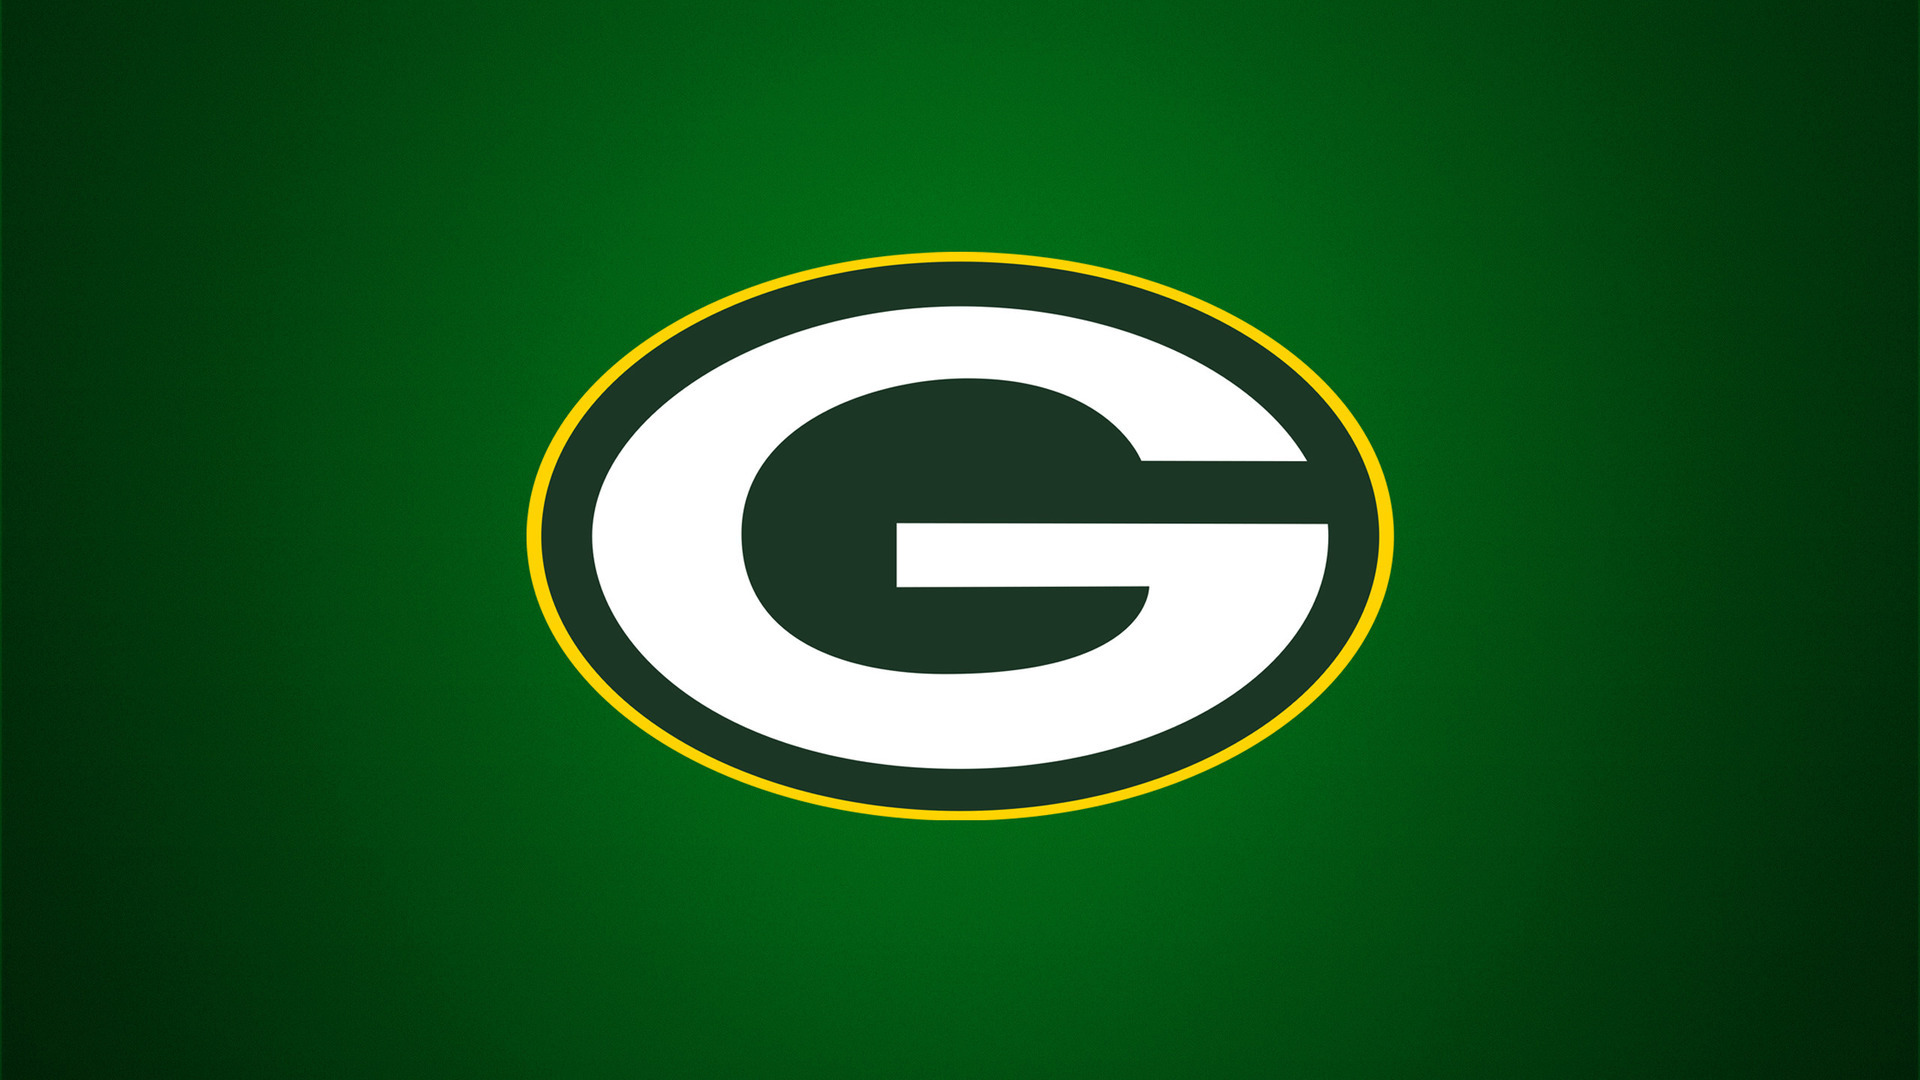 Green Bay Packers HD Image Sports Nfl Football